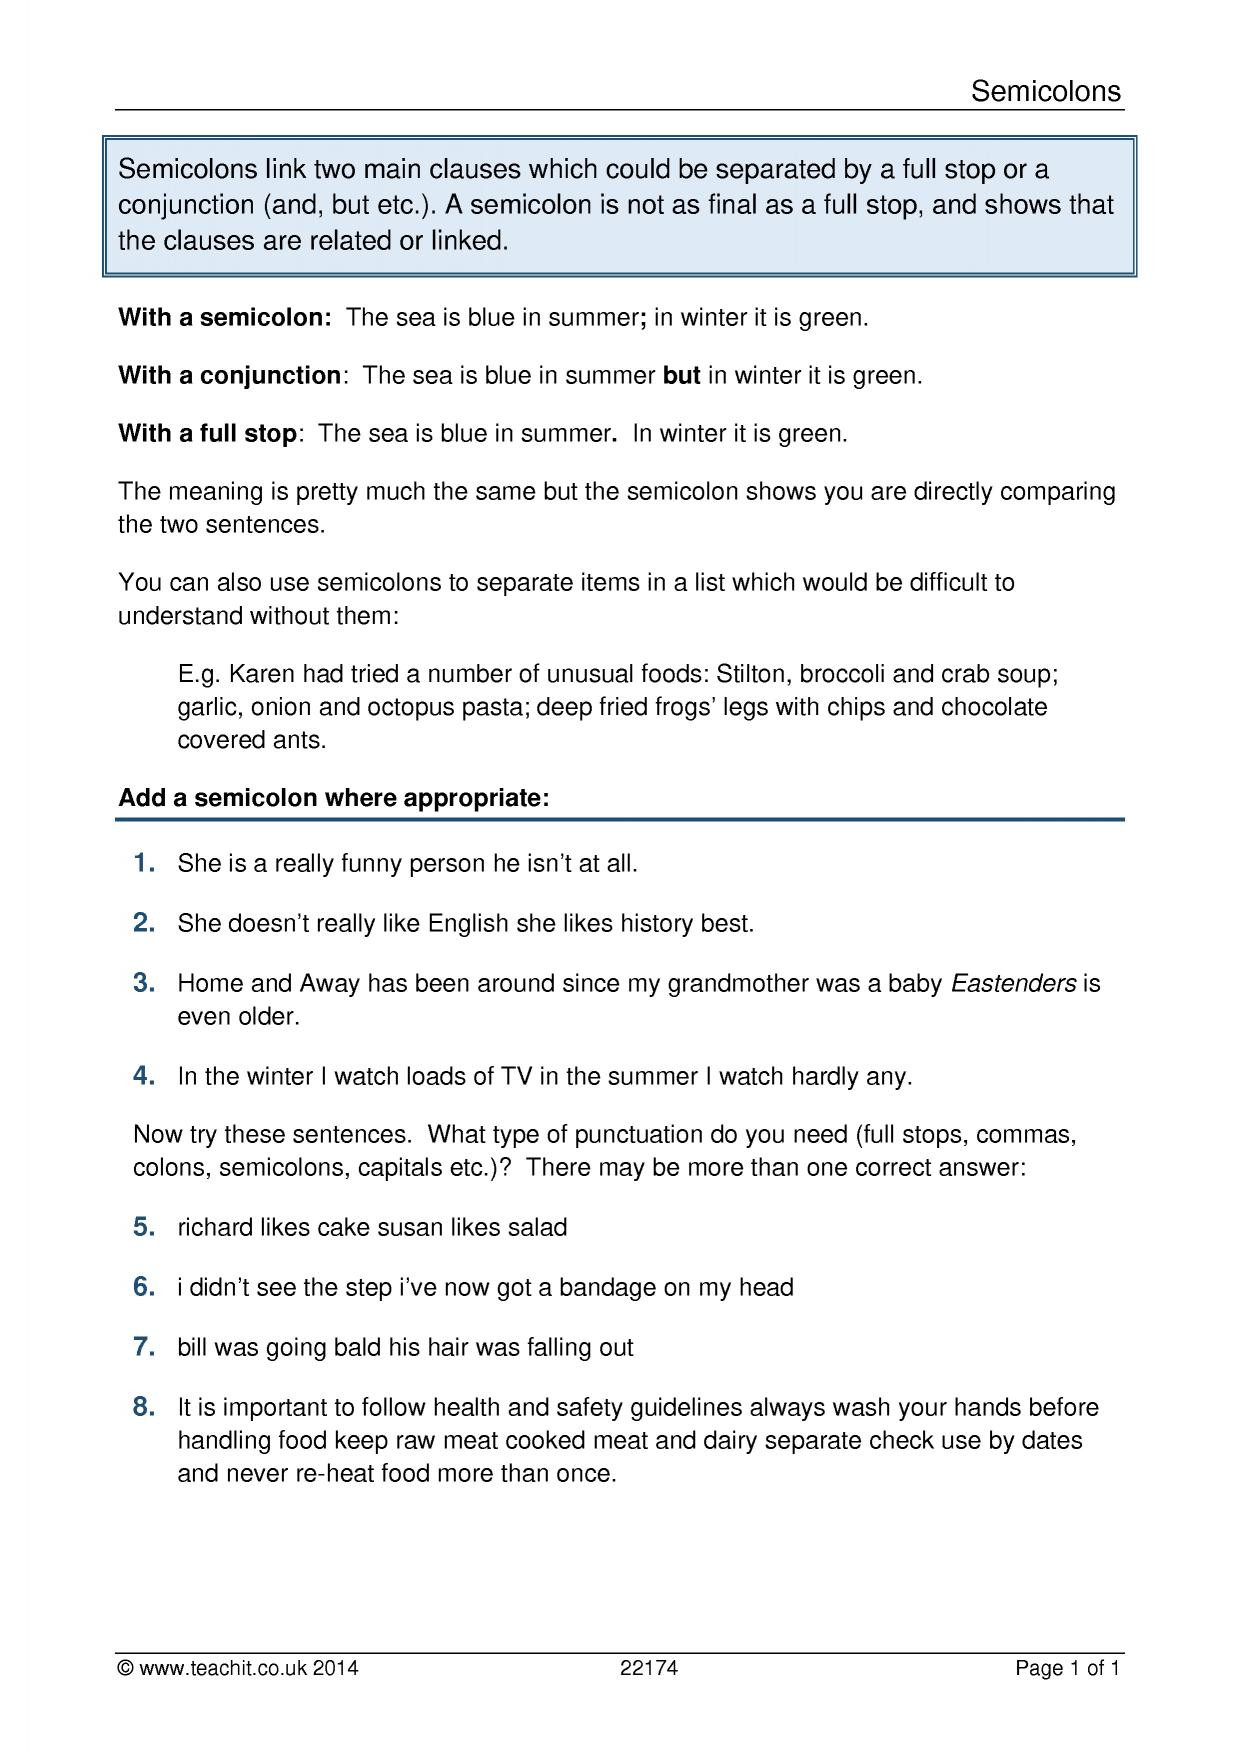 Semicolons and Colons Worksheet Using Semicolons